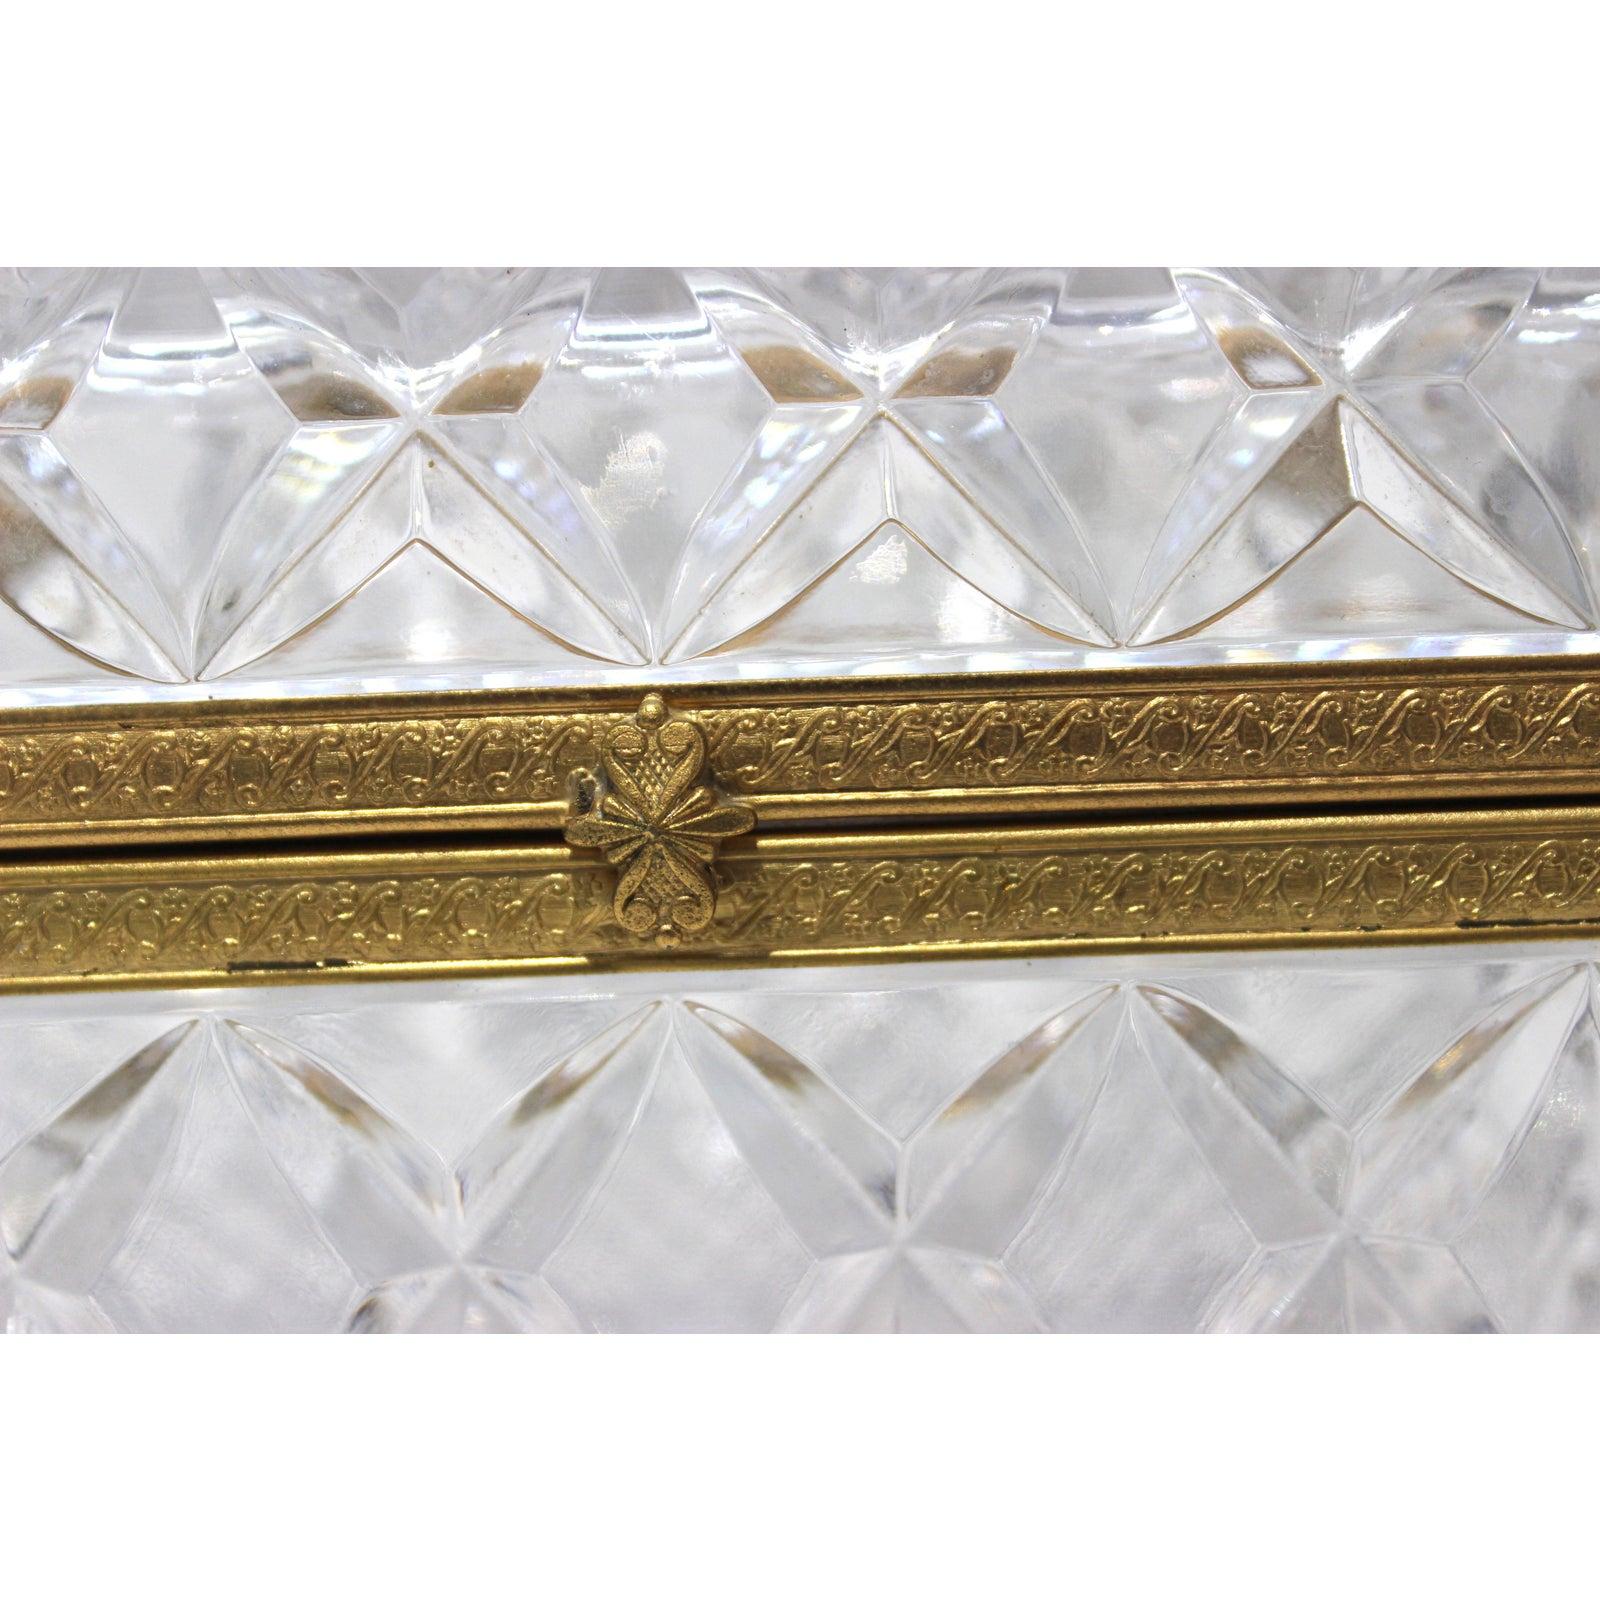 Mid-20th Century Jewelry Casket or Box of Faceted Lead Crystal and Gilt Bronze